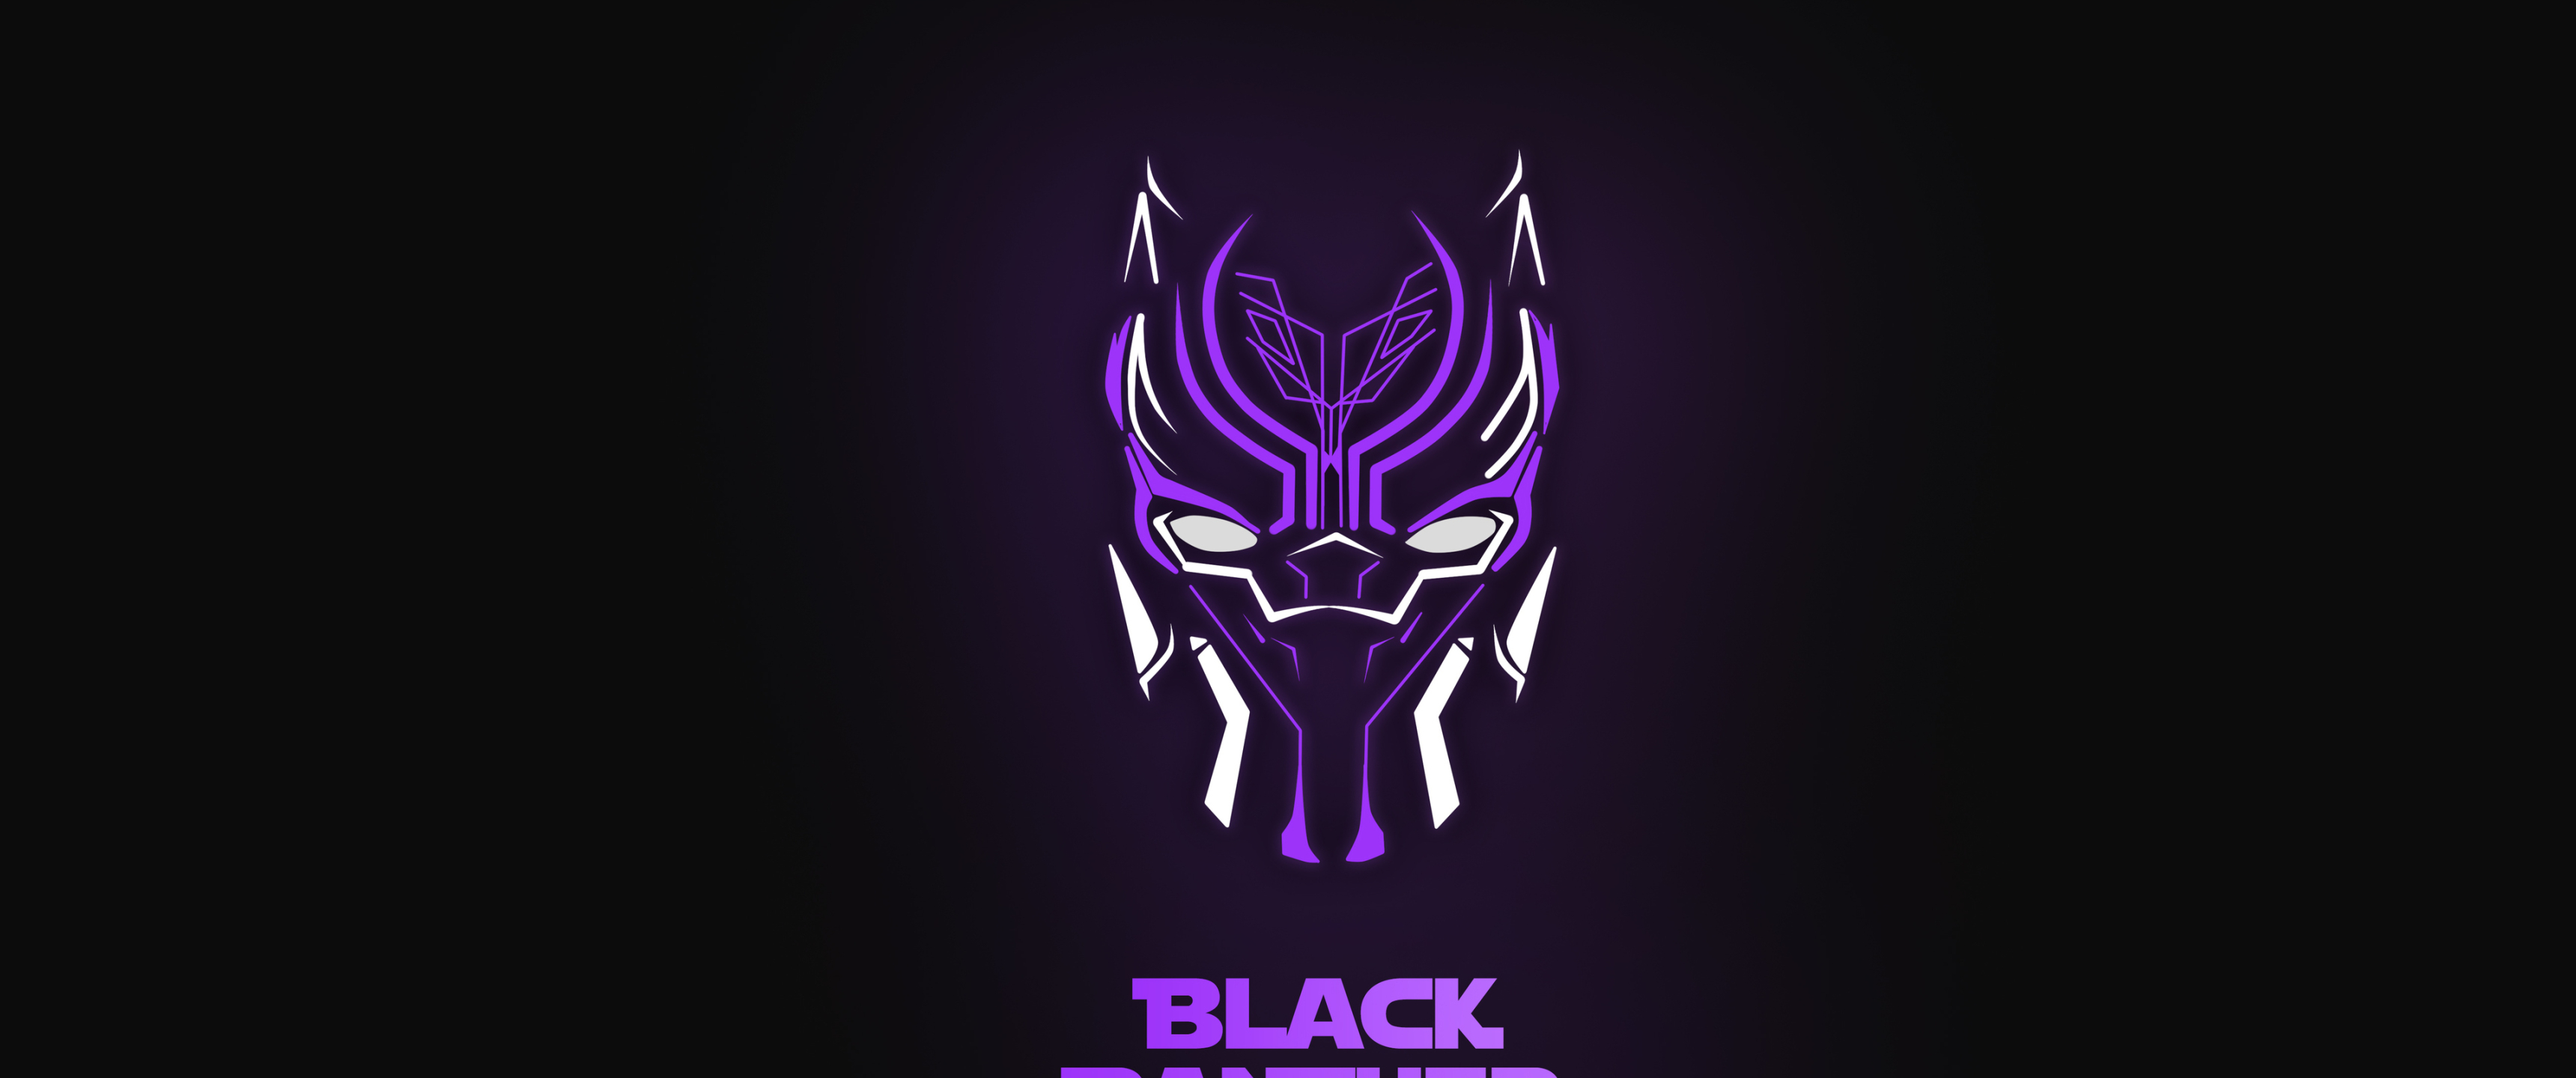 3440x1440 Black Panther Minimal Mask 3440x1440 Resolution Wallpaper, HD  Superheroes 4K Wallpapers, Images, Photos and Background - Wallpapers Den